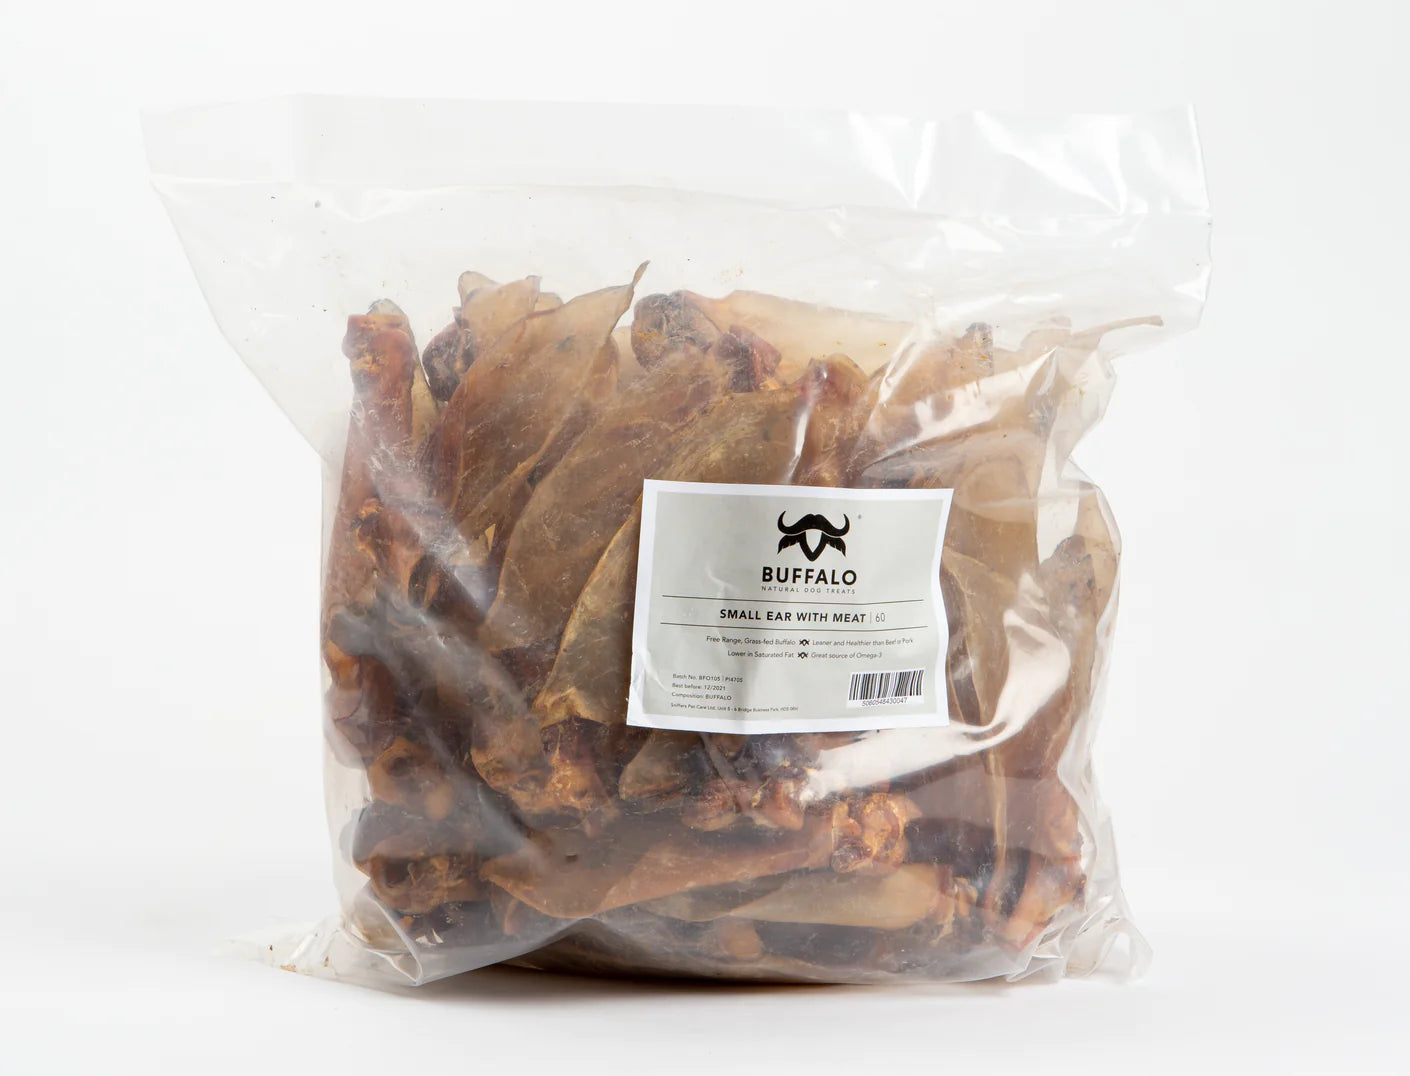 Buffalo Ears Small with Meat Pack of 60